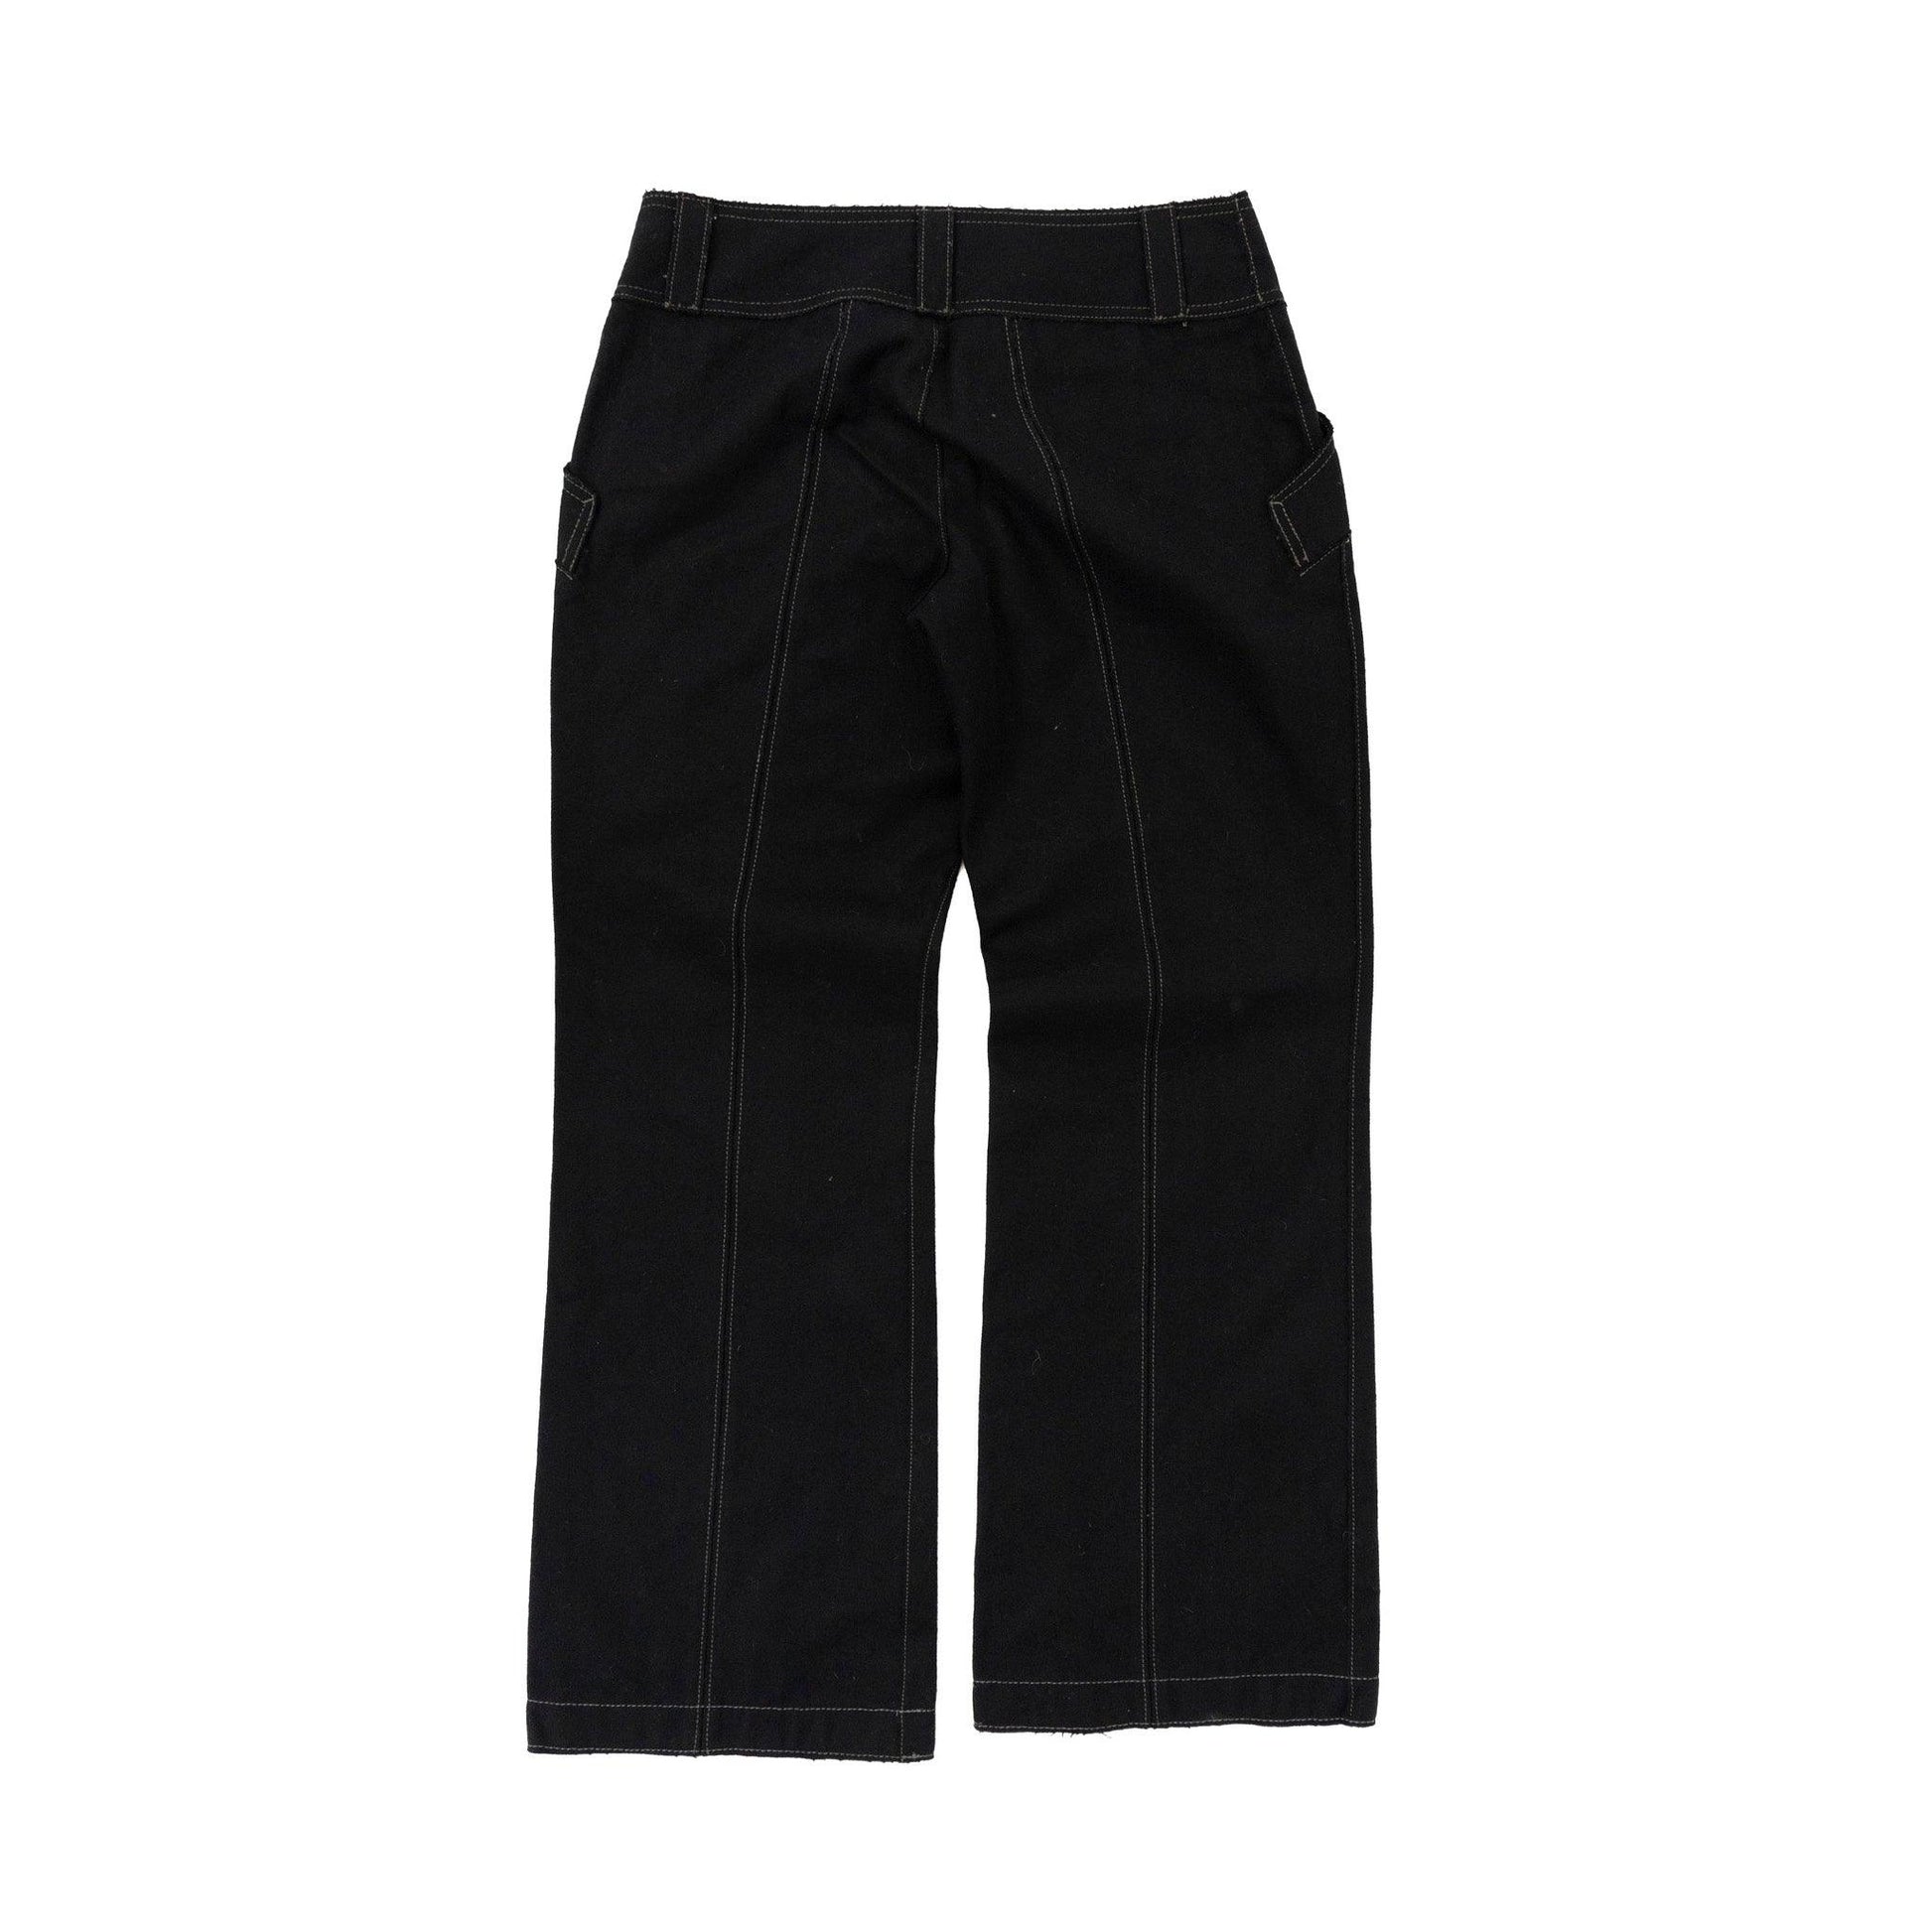 C.P. Company A/W 2004 Outerstitch Trousers - Known Source